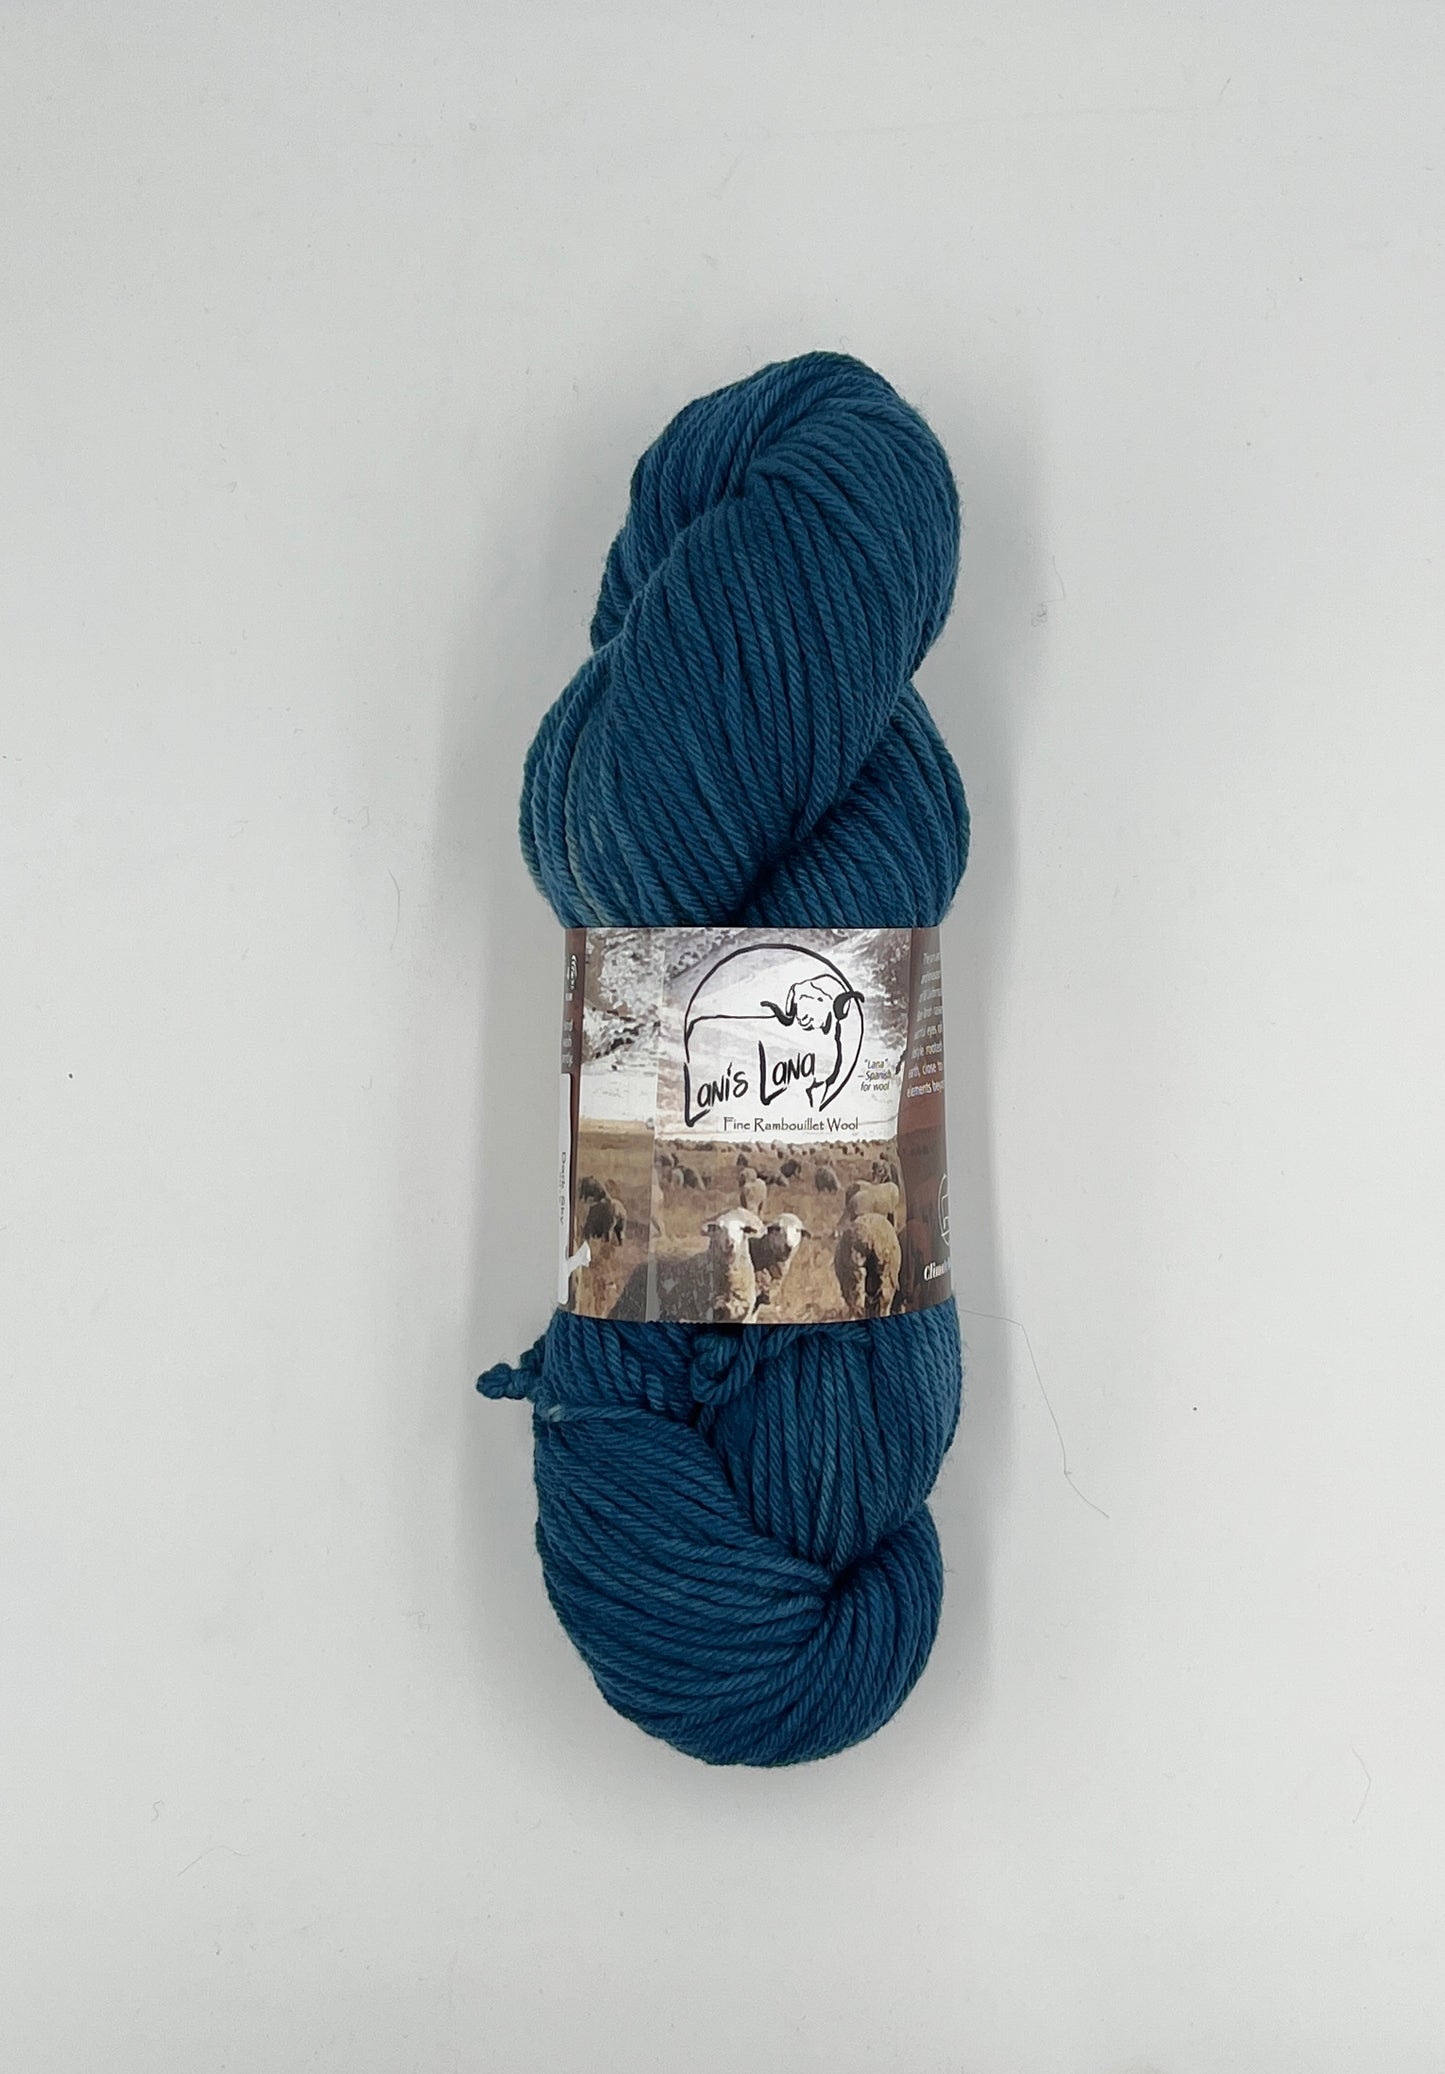 Clarks Valley - Naturally Dyed Aran Weight Yarn